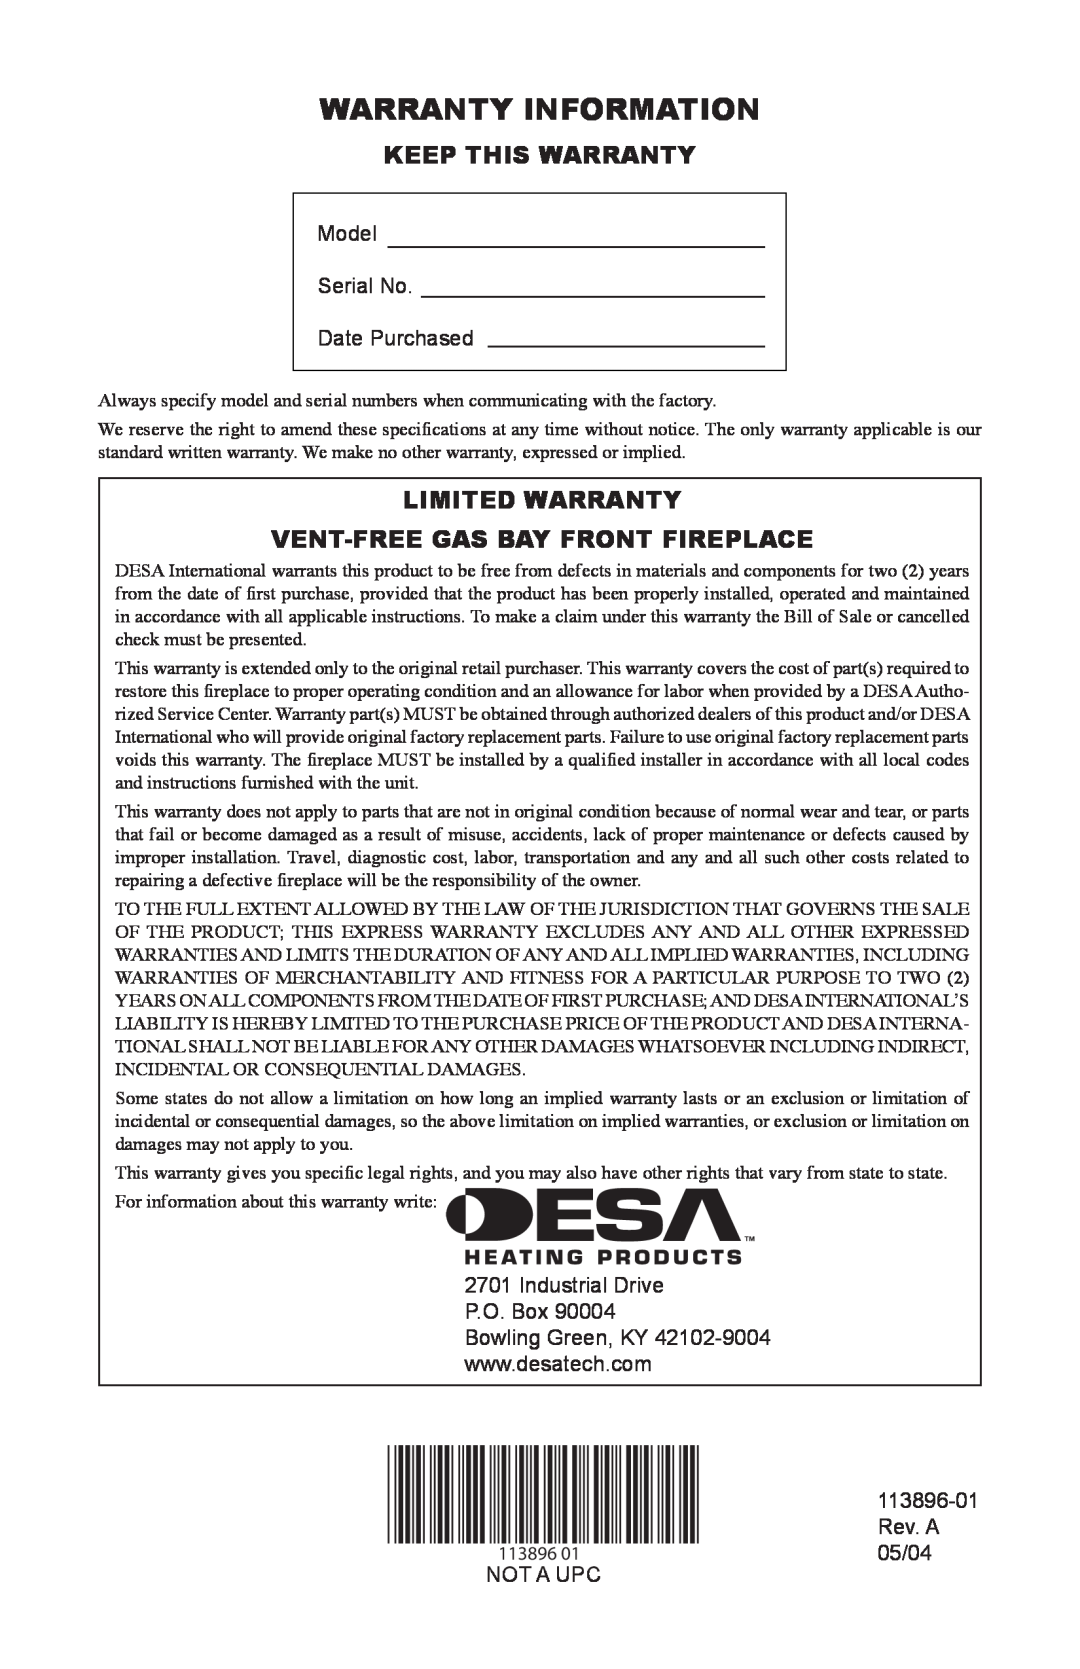 Desa CF26PTA Warranty Information, Keep This Warranty, Limited Warranty Vent-Free Gas Bay Front Fireplace 